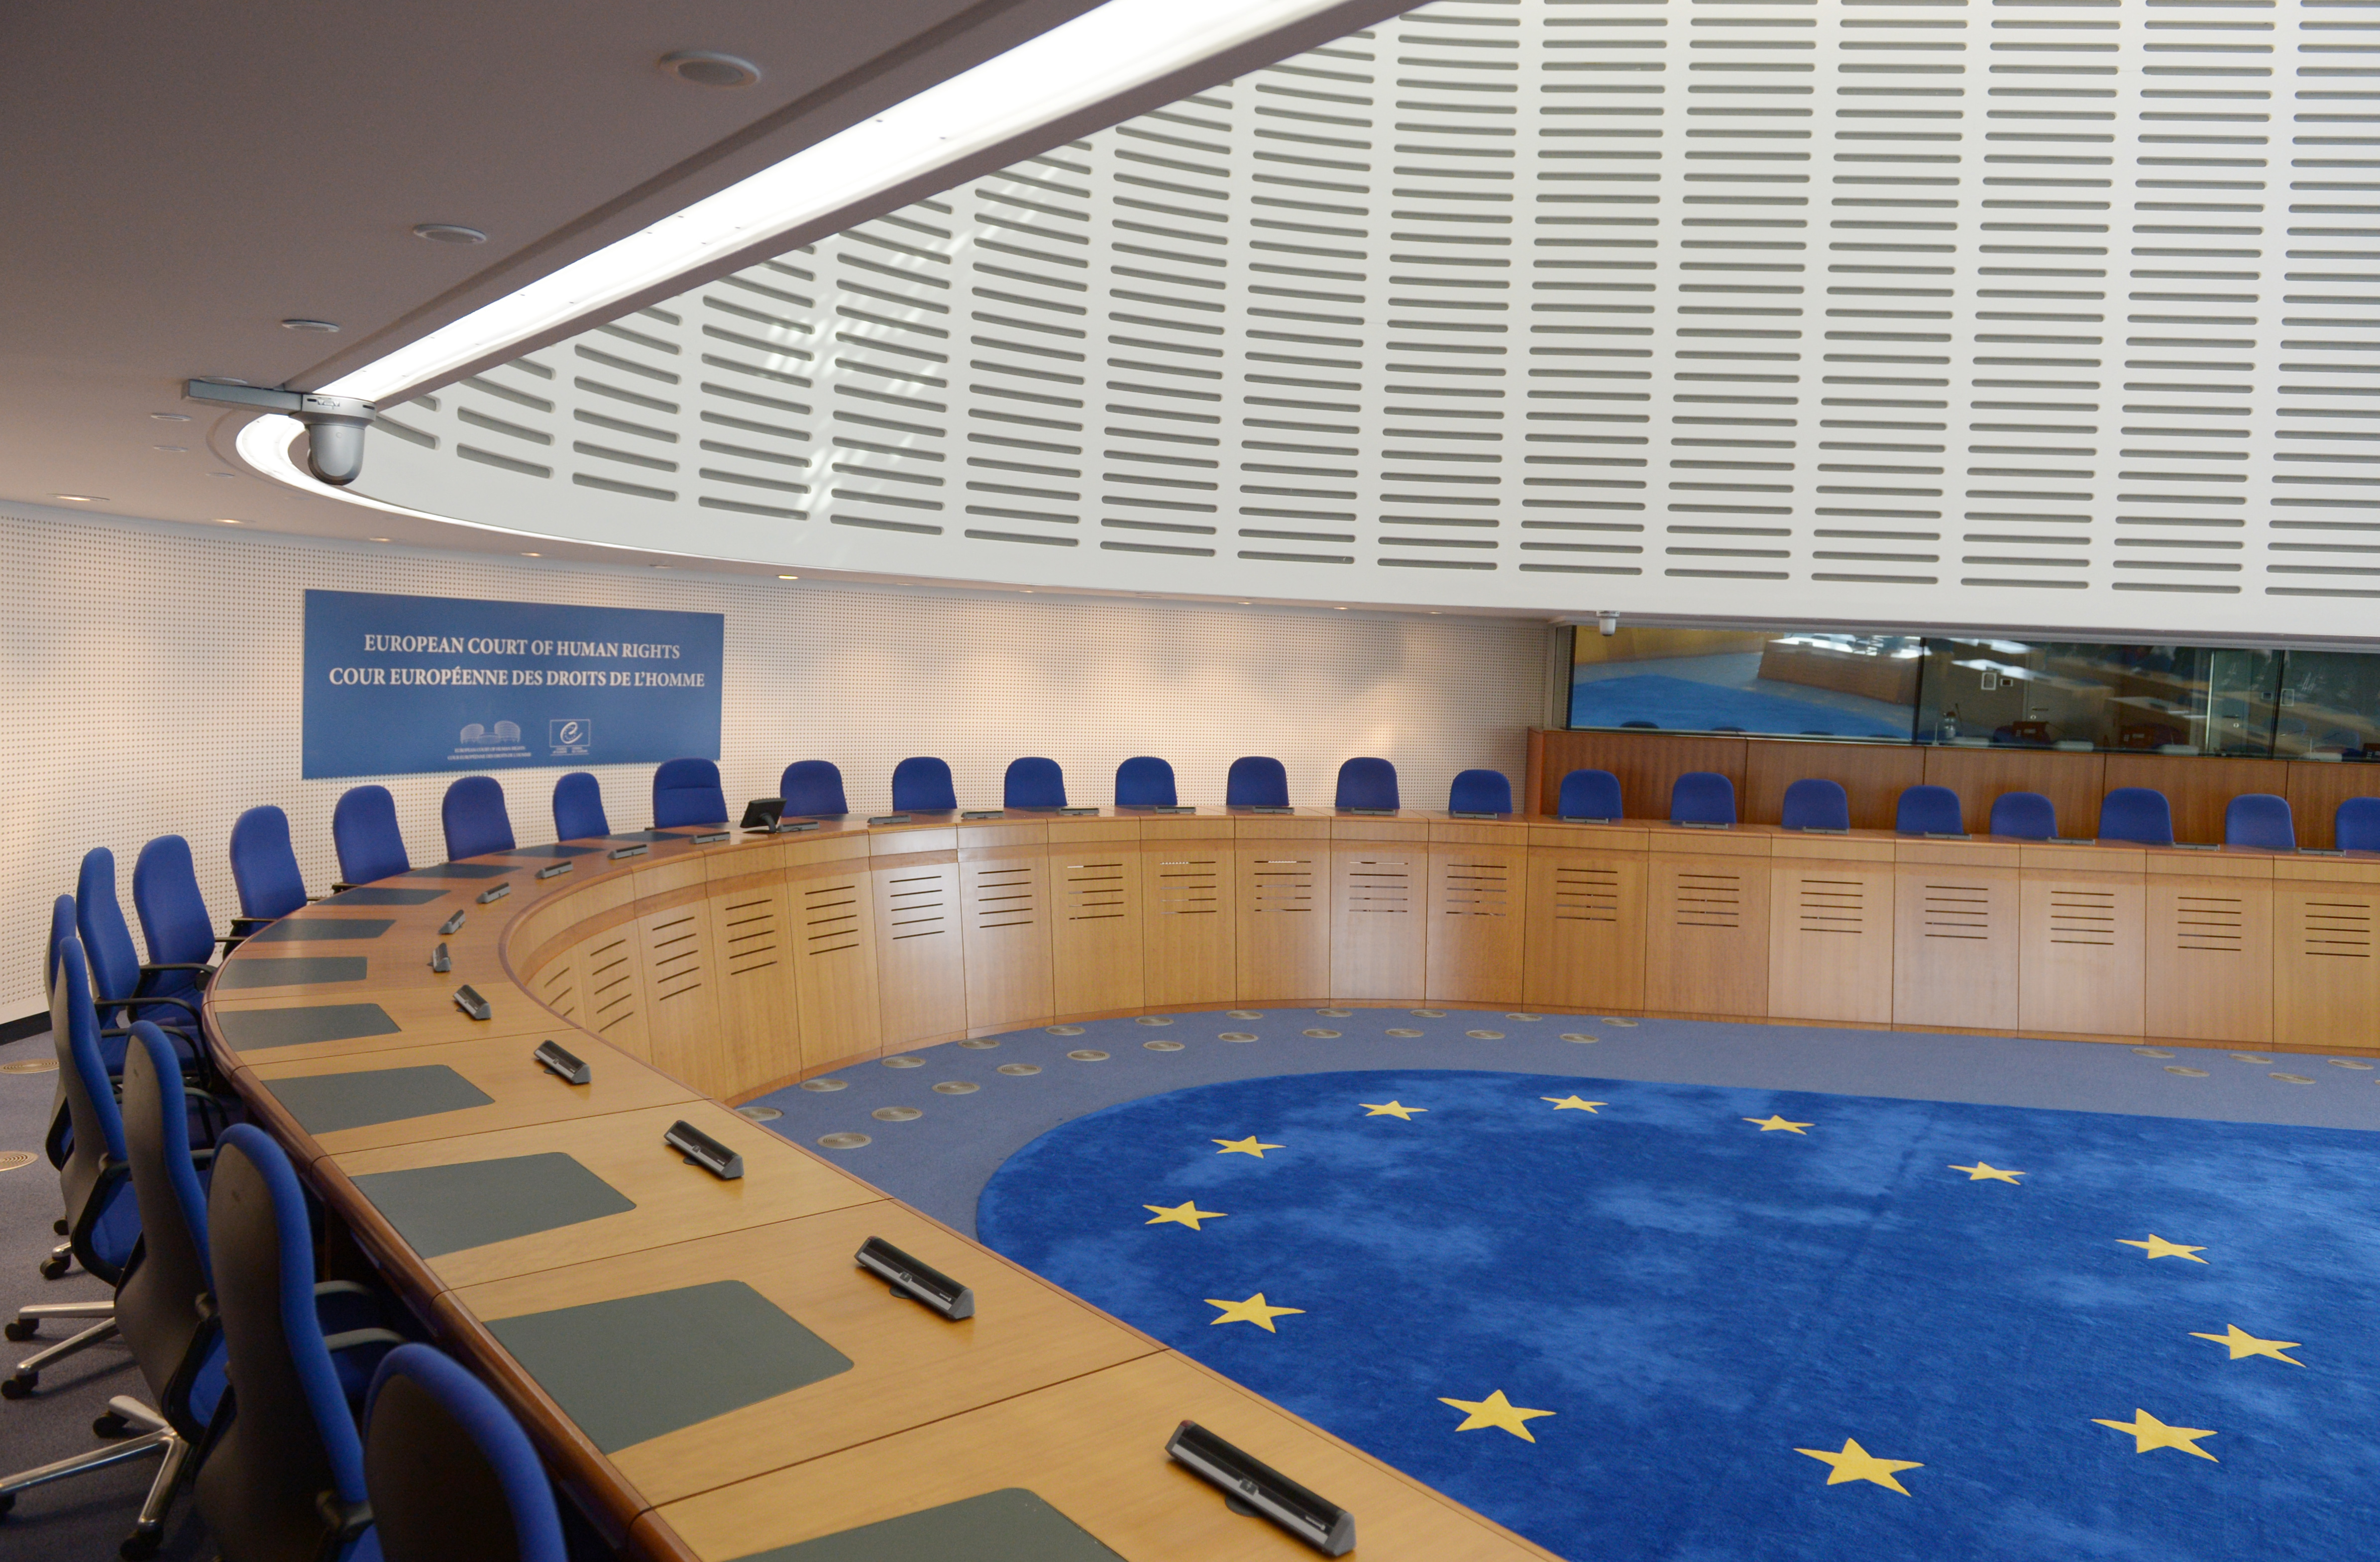 The courtroom in the European Court of Human Rights 